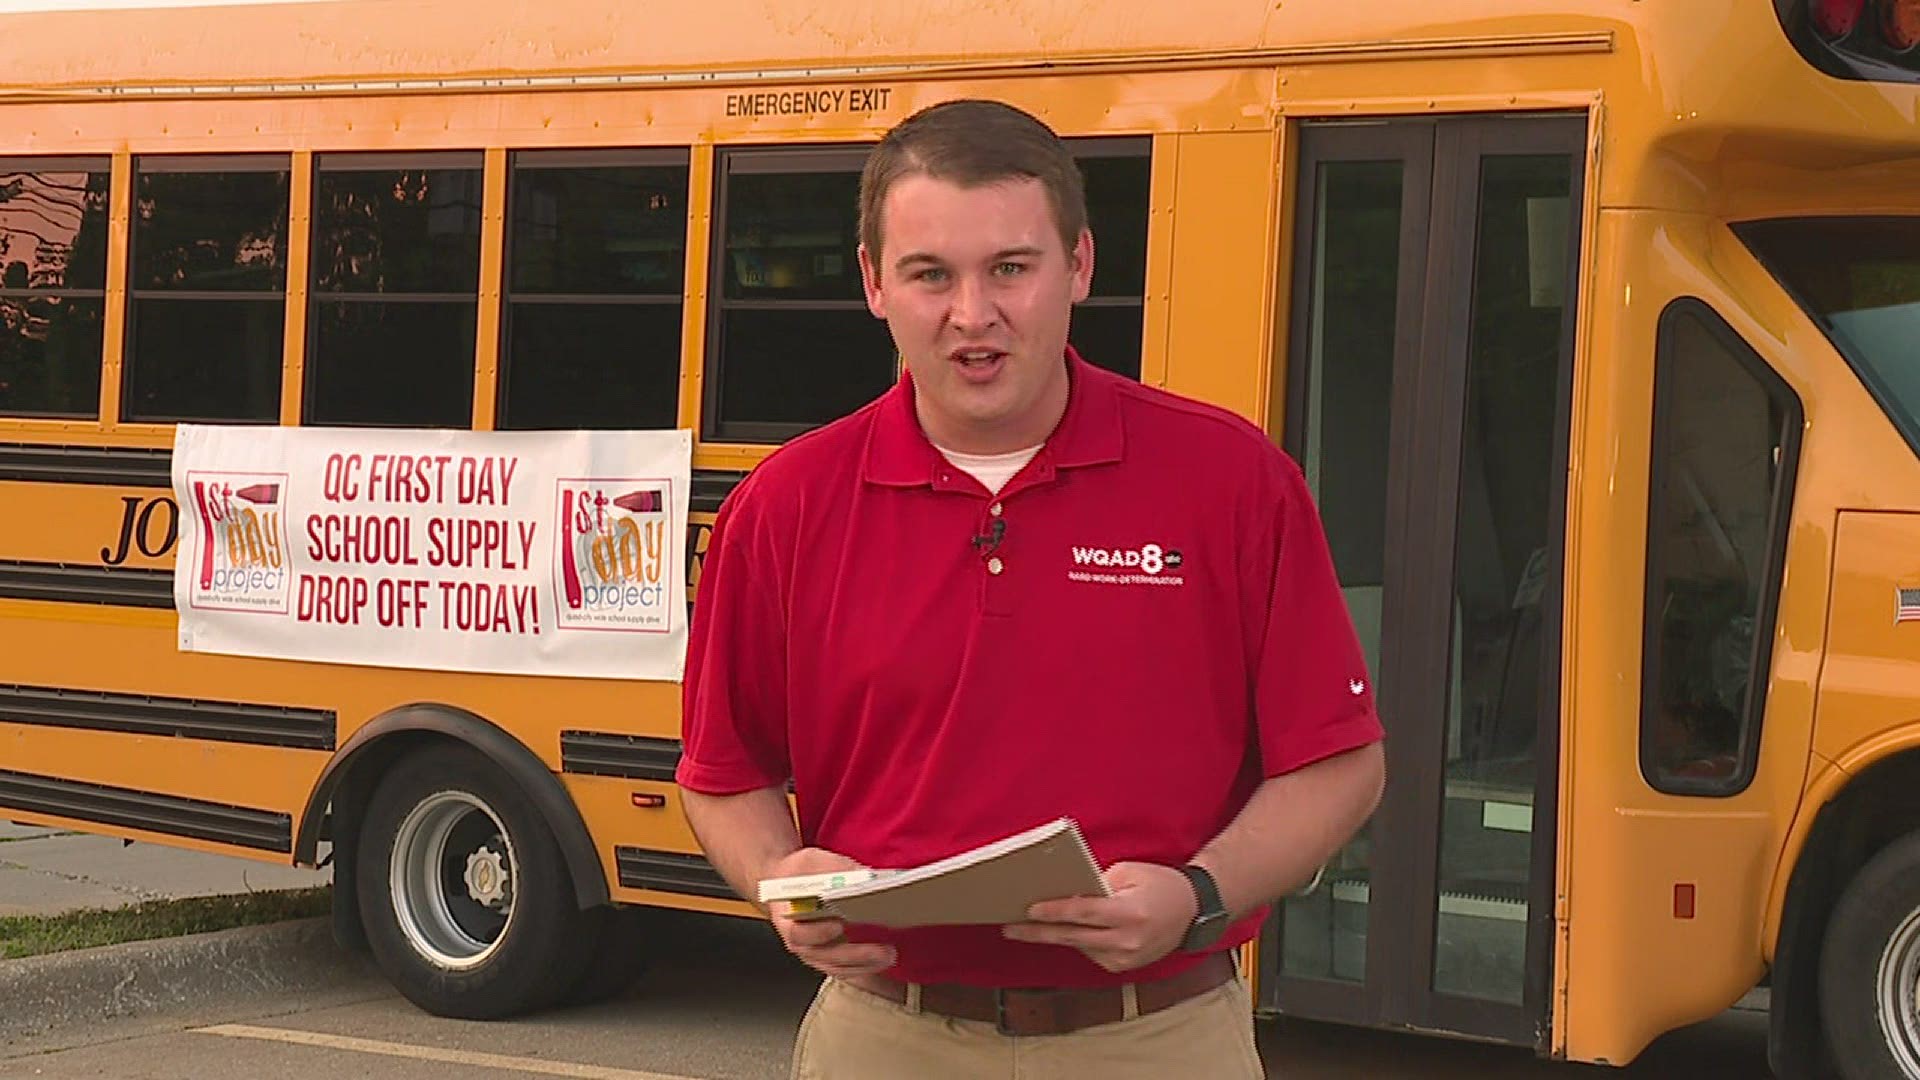 You can drop off supplies at WQAD until 6 p.m. Wednesday, July 28th.